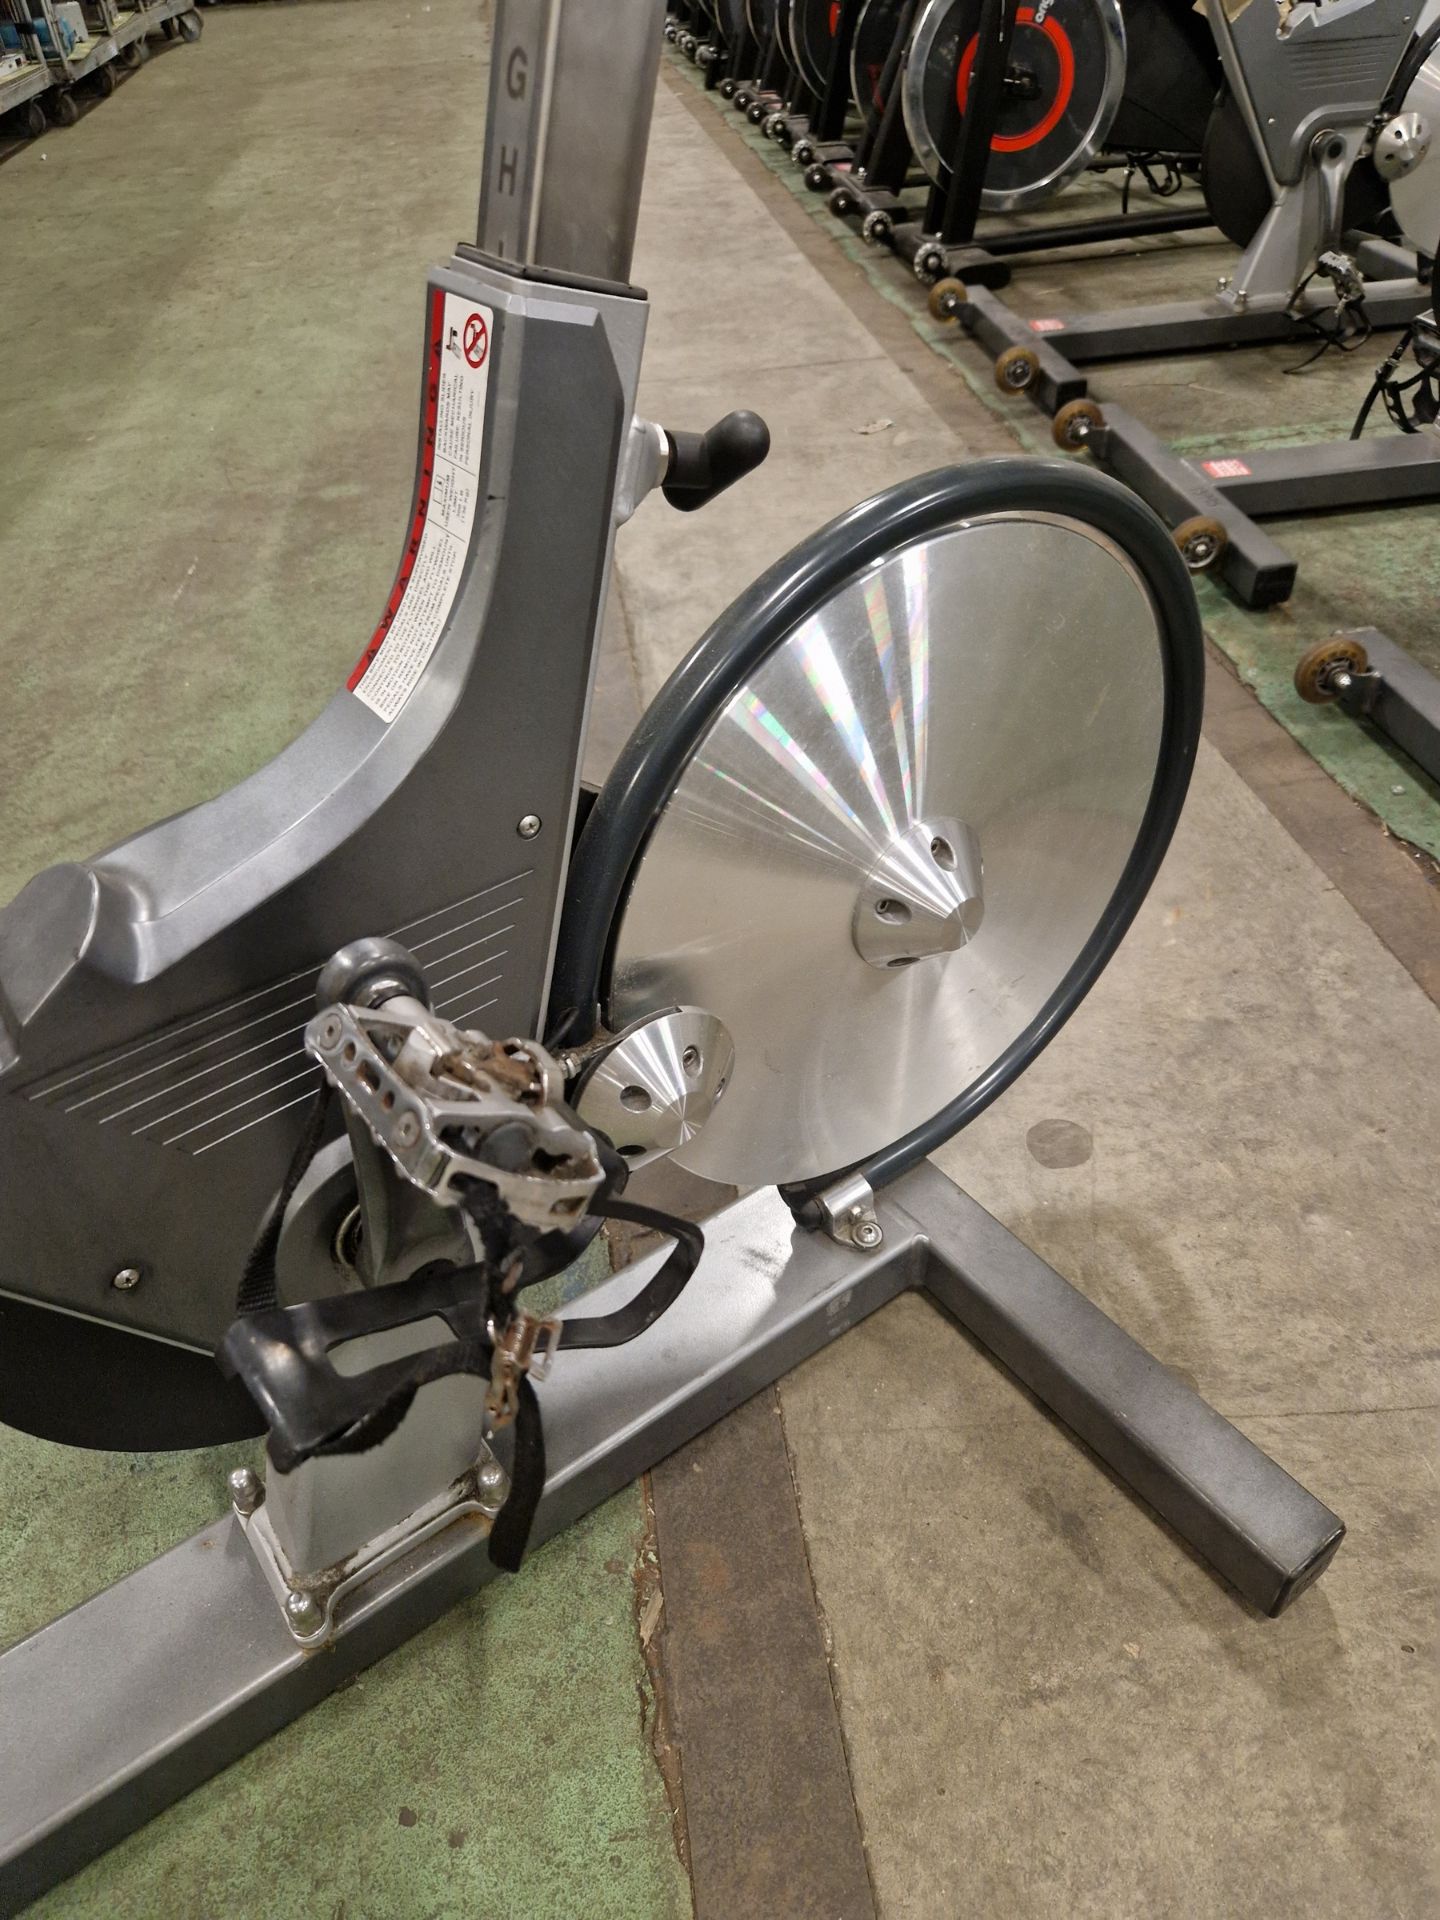 Keiser M3 exercise spin bike - NON FUNCTIONAL DISPLAY - Image 3 of 4